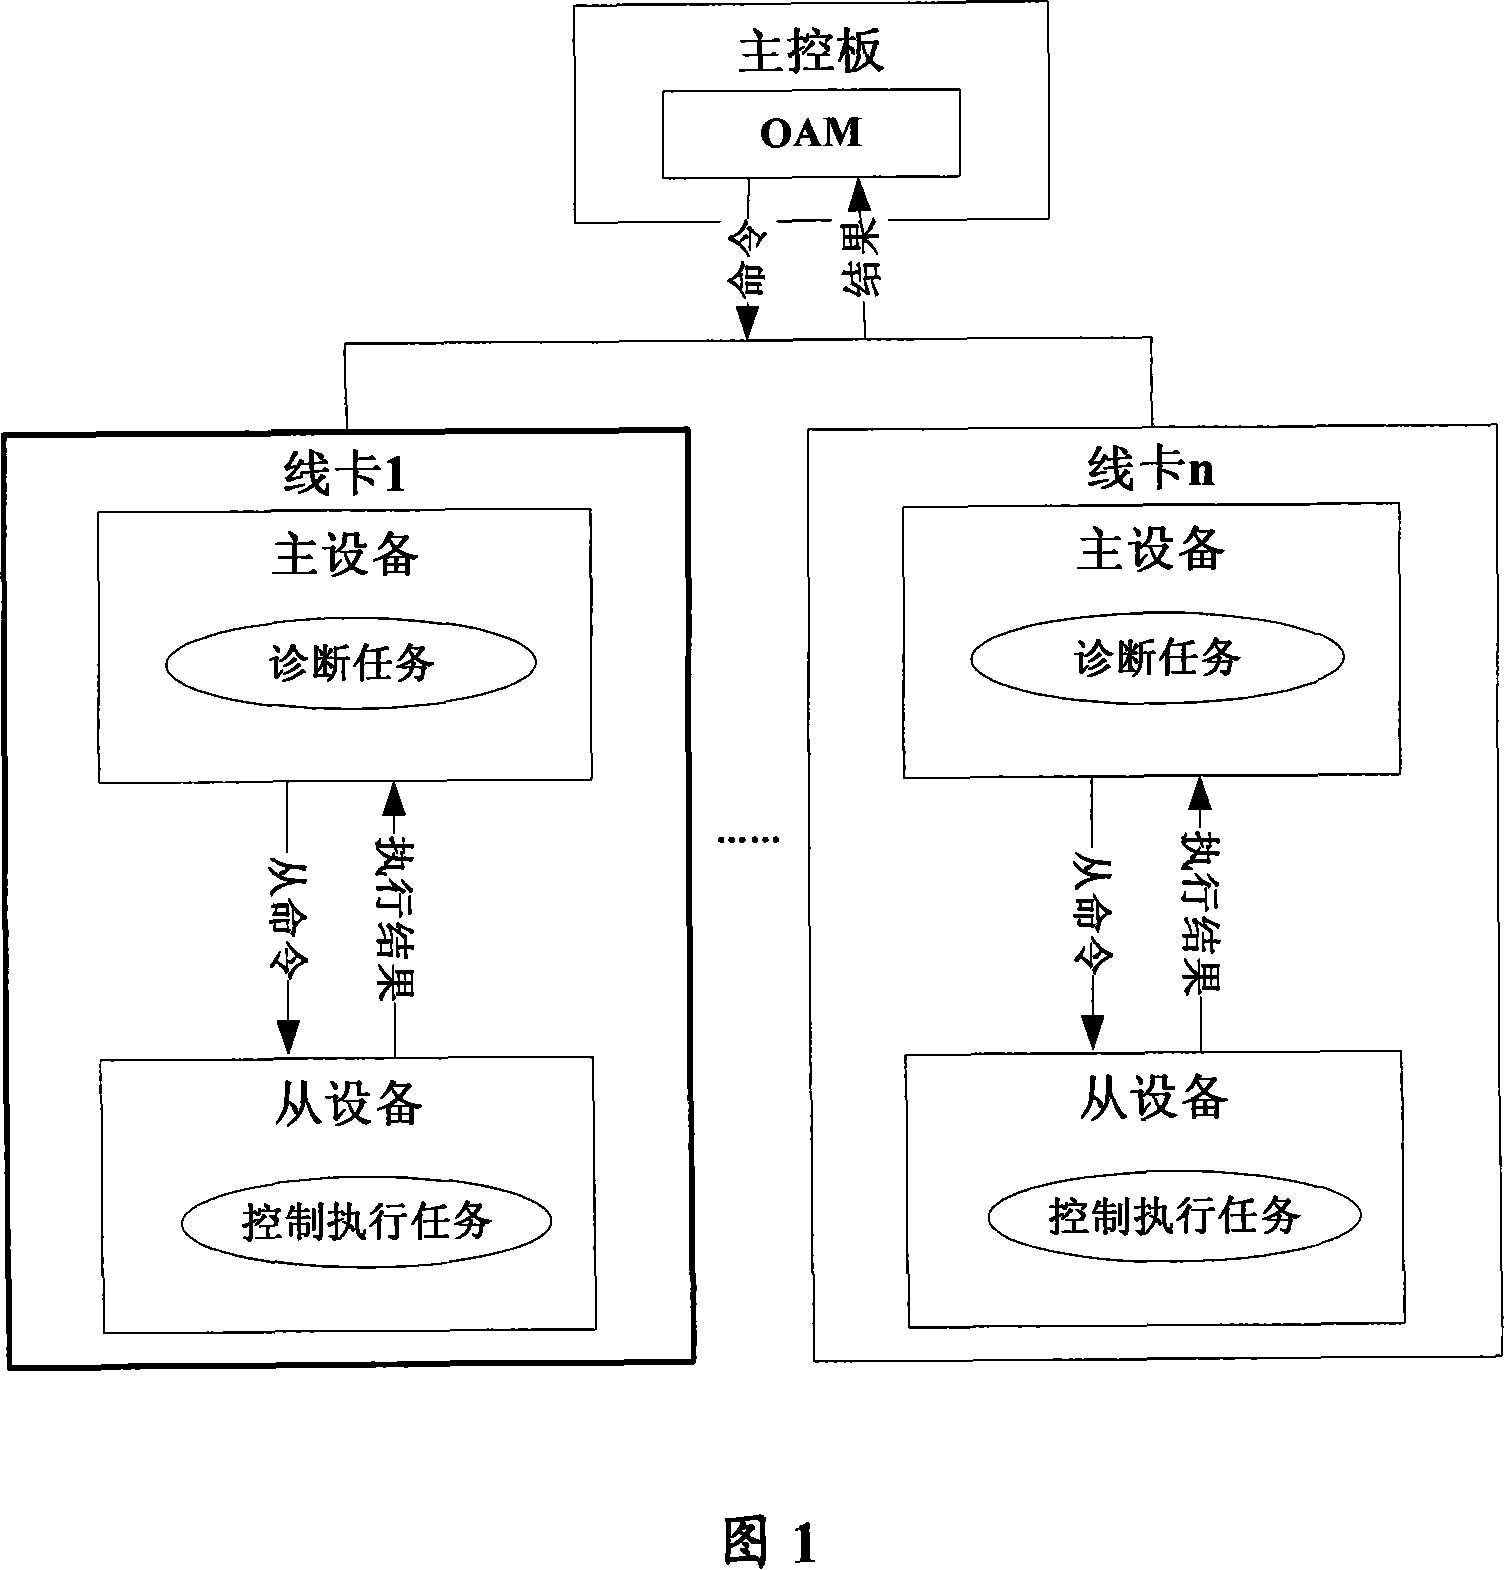 Operation control method of distributed router system